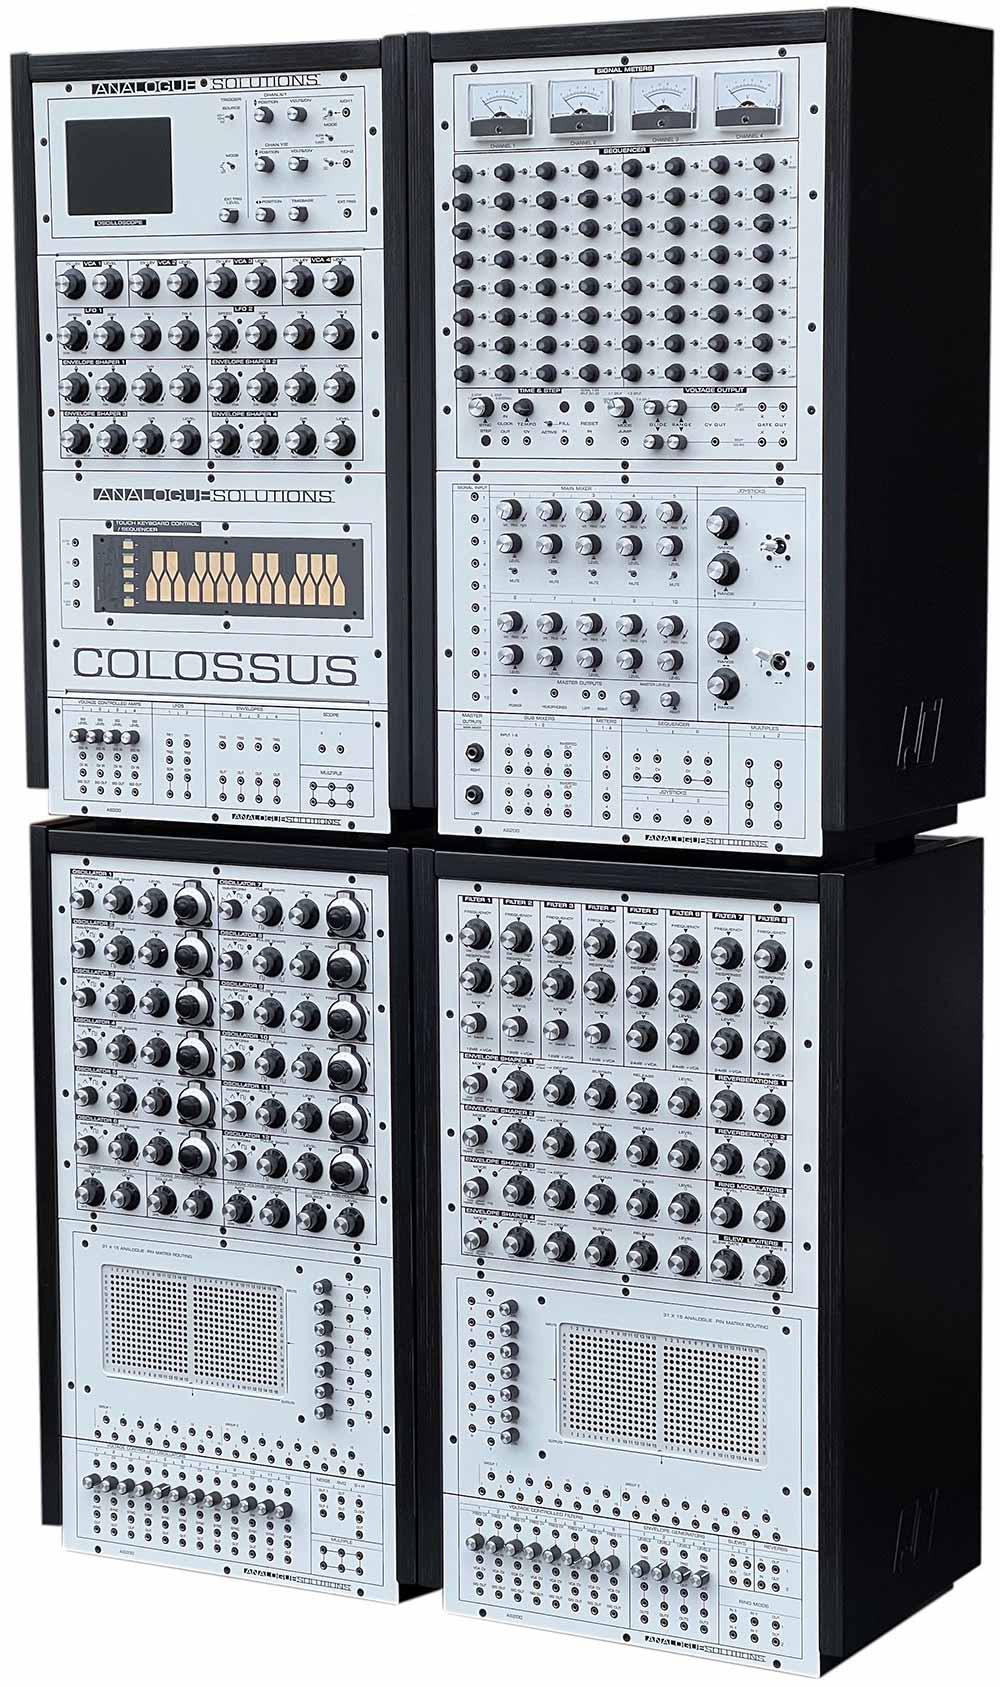 Analogue Solutions is effectively parsing out the Colossus